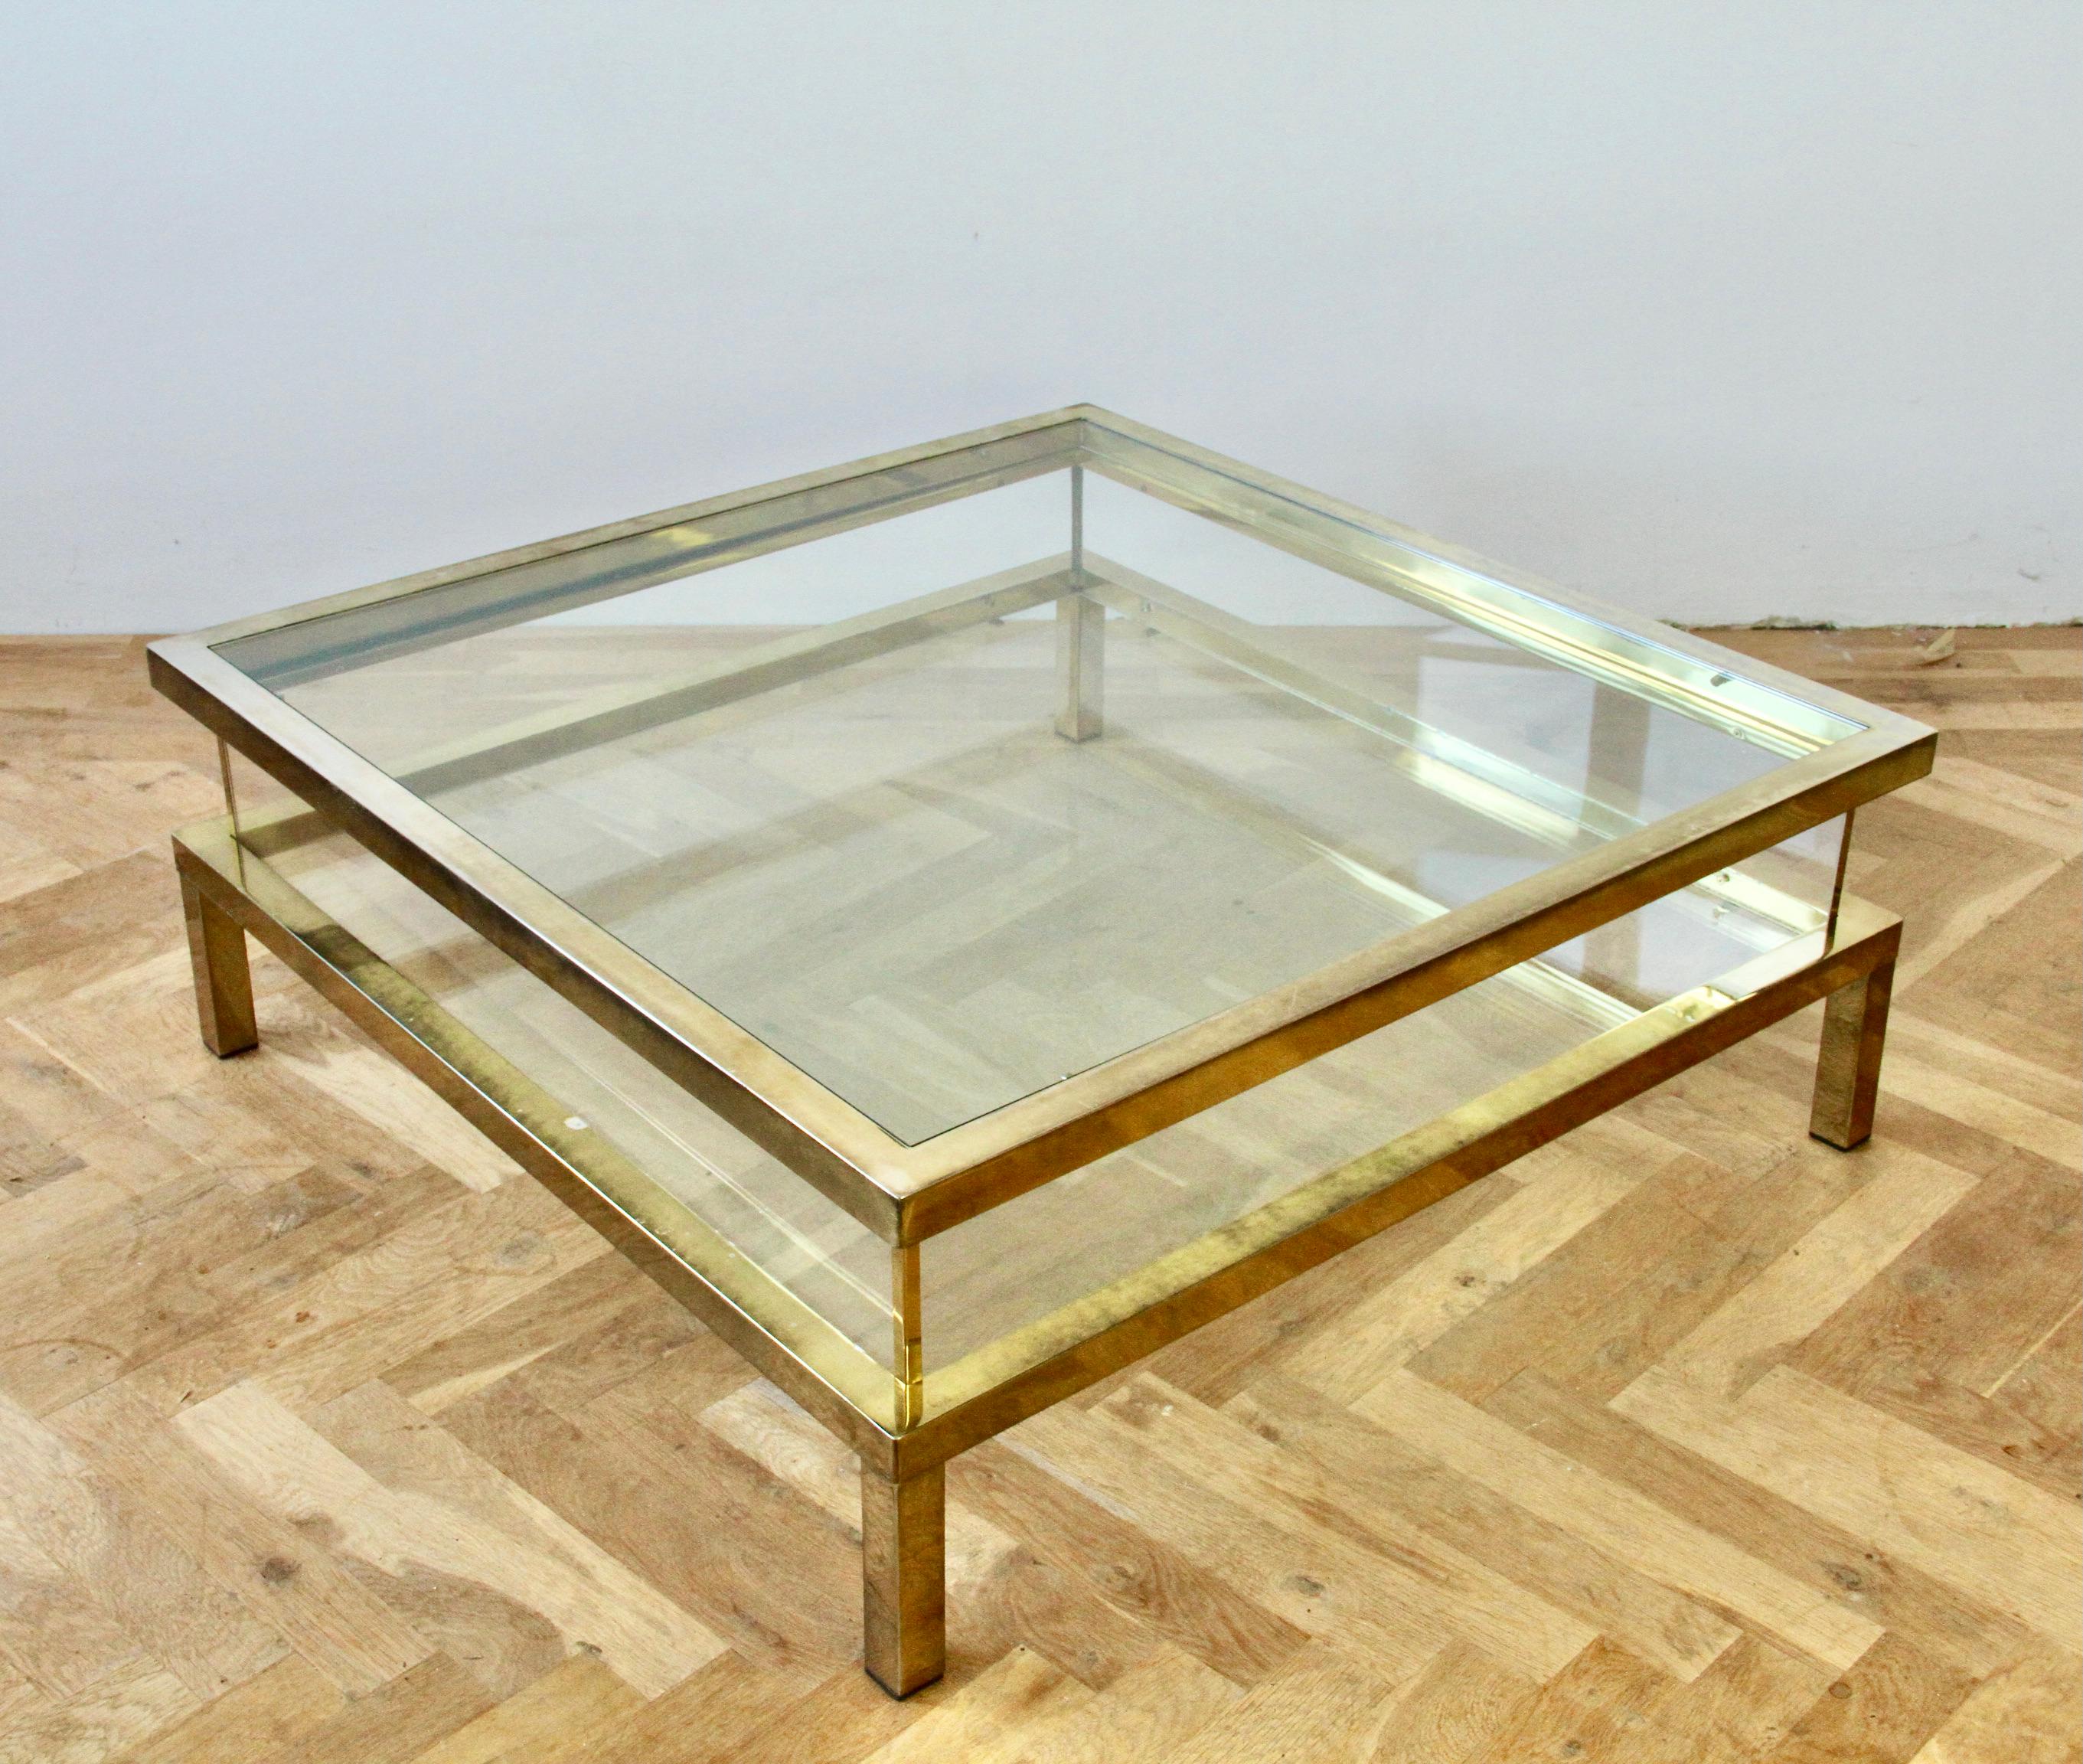 Stunning vintage Mid-Century Modern square vitrine coffee table in polished brass with sliding glass tabletop and acrylic / Lucite side walls in the style of Maison Jansen, circa 1970s. Perfect for the Hollywood Regency style enthusiast or